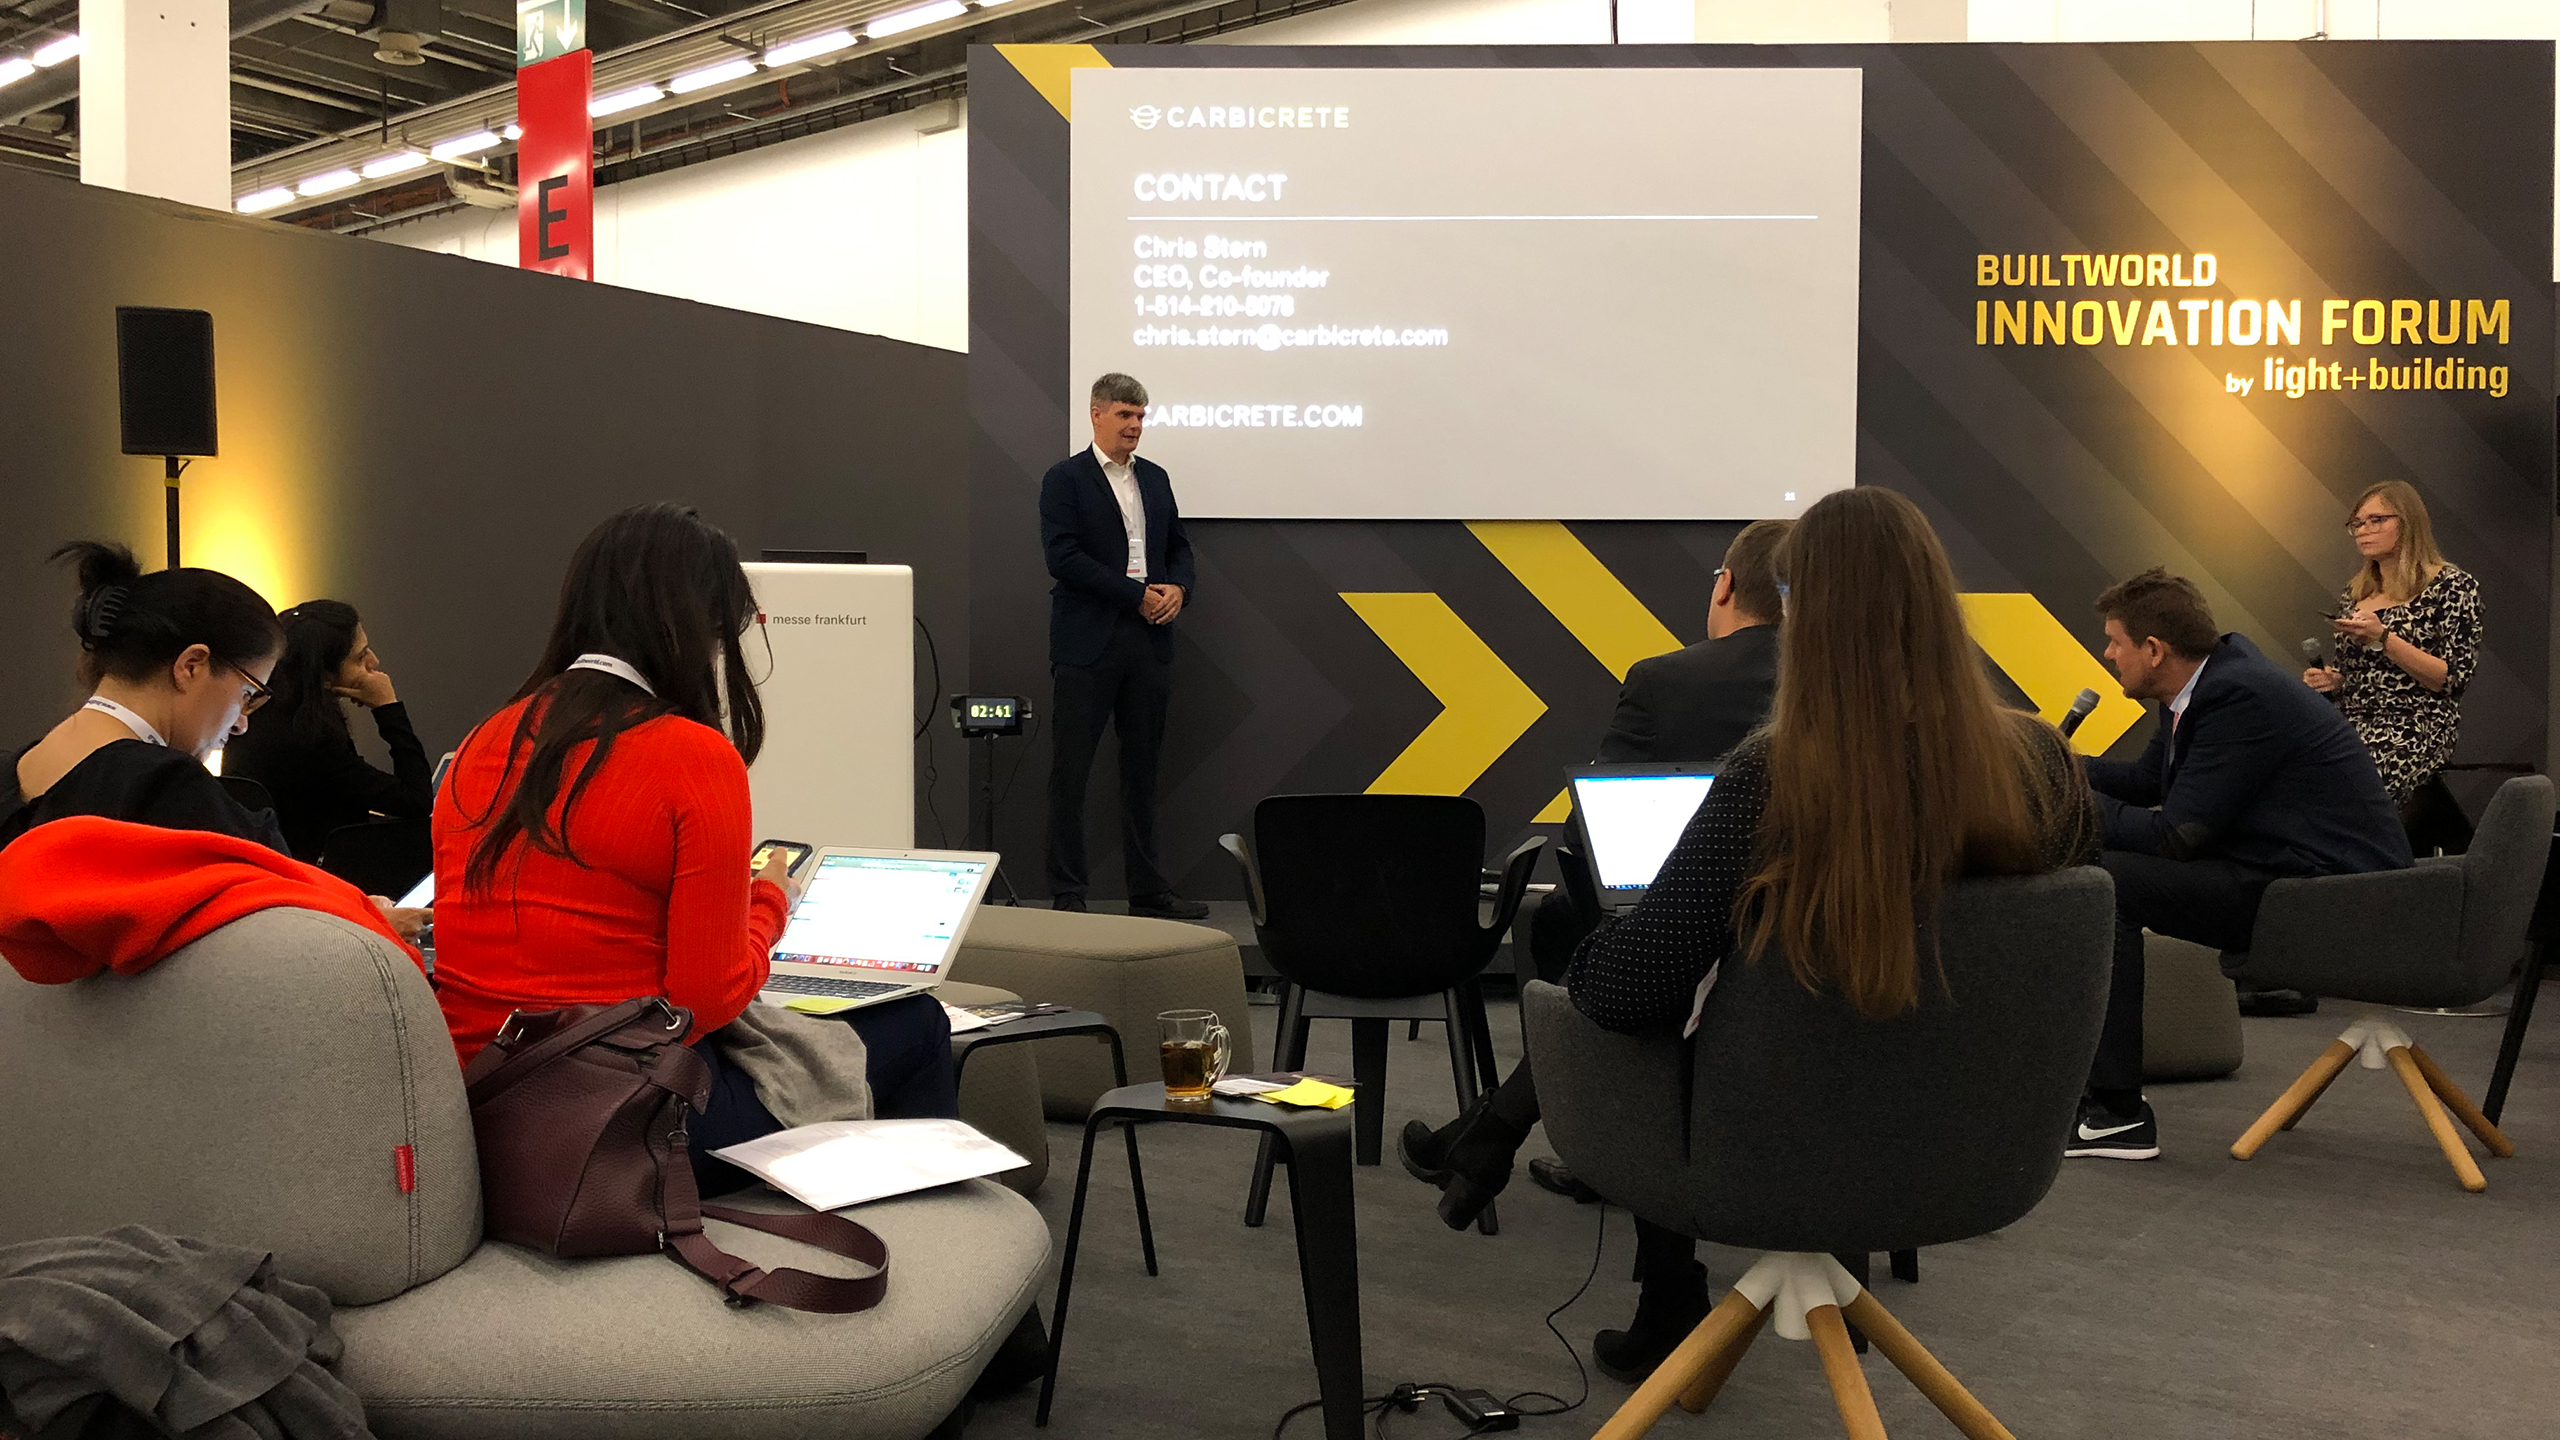 Builtworld Construction Innovation Contest: The two-day prepitch in hall 9.0 of Messe Frankfurt brought together jurors from the best-known established companies in the real estate and construction sectors as well as building technology. (Source: Messe Frankfurt / EBU 62 2019)